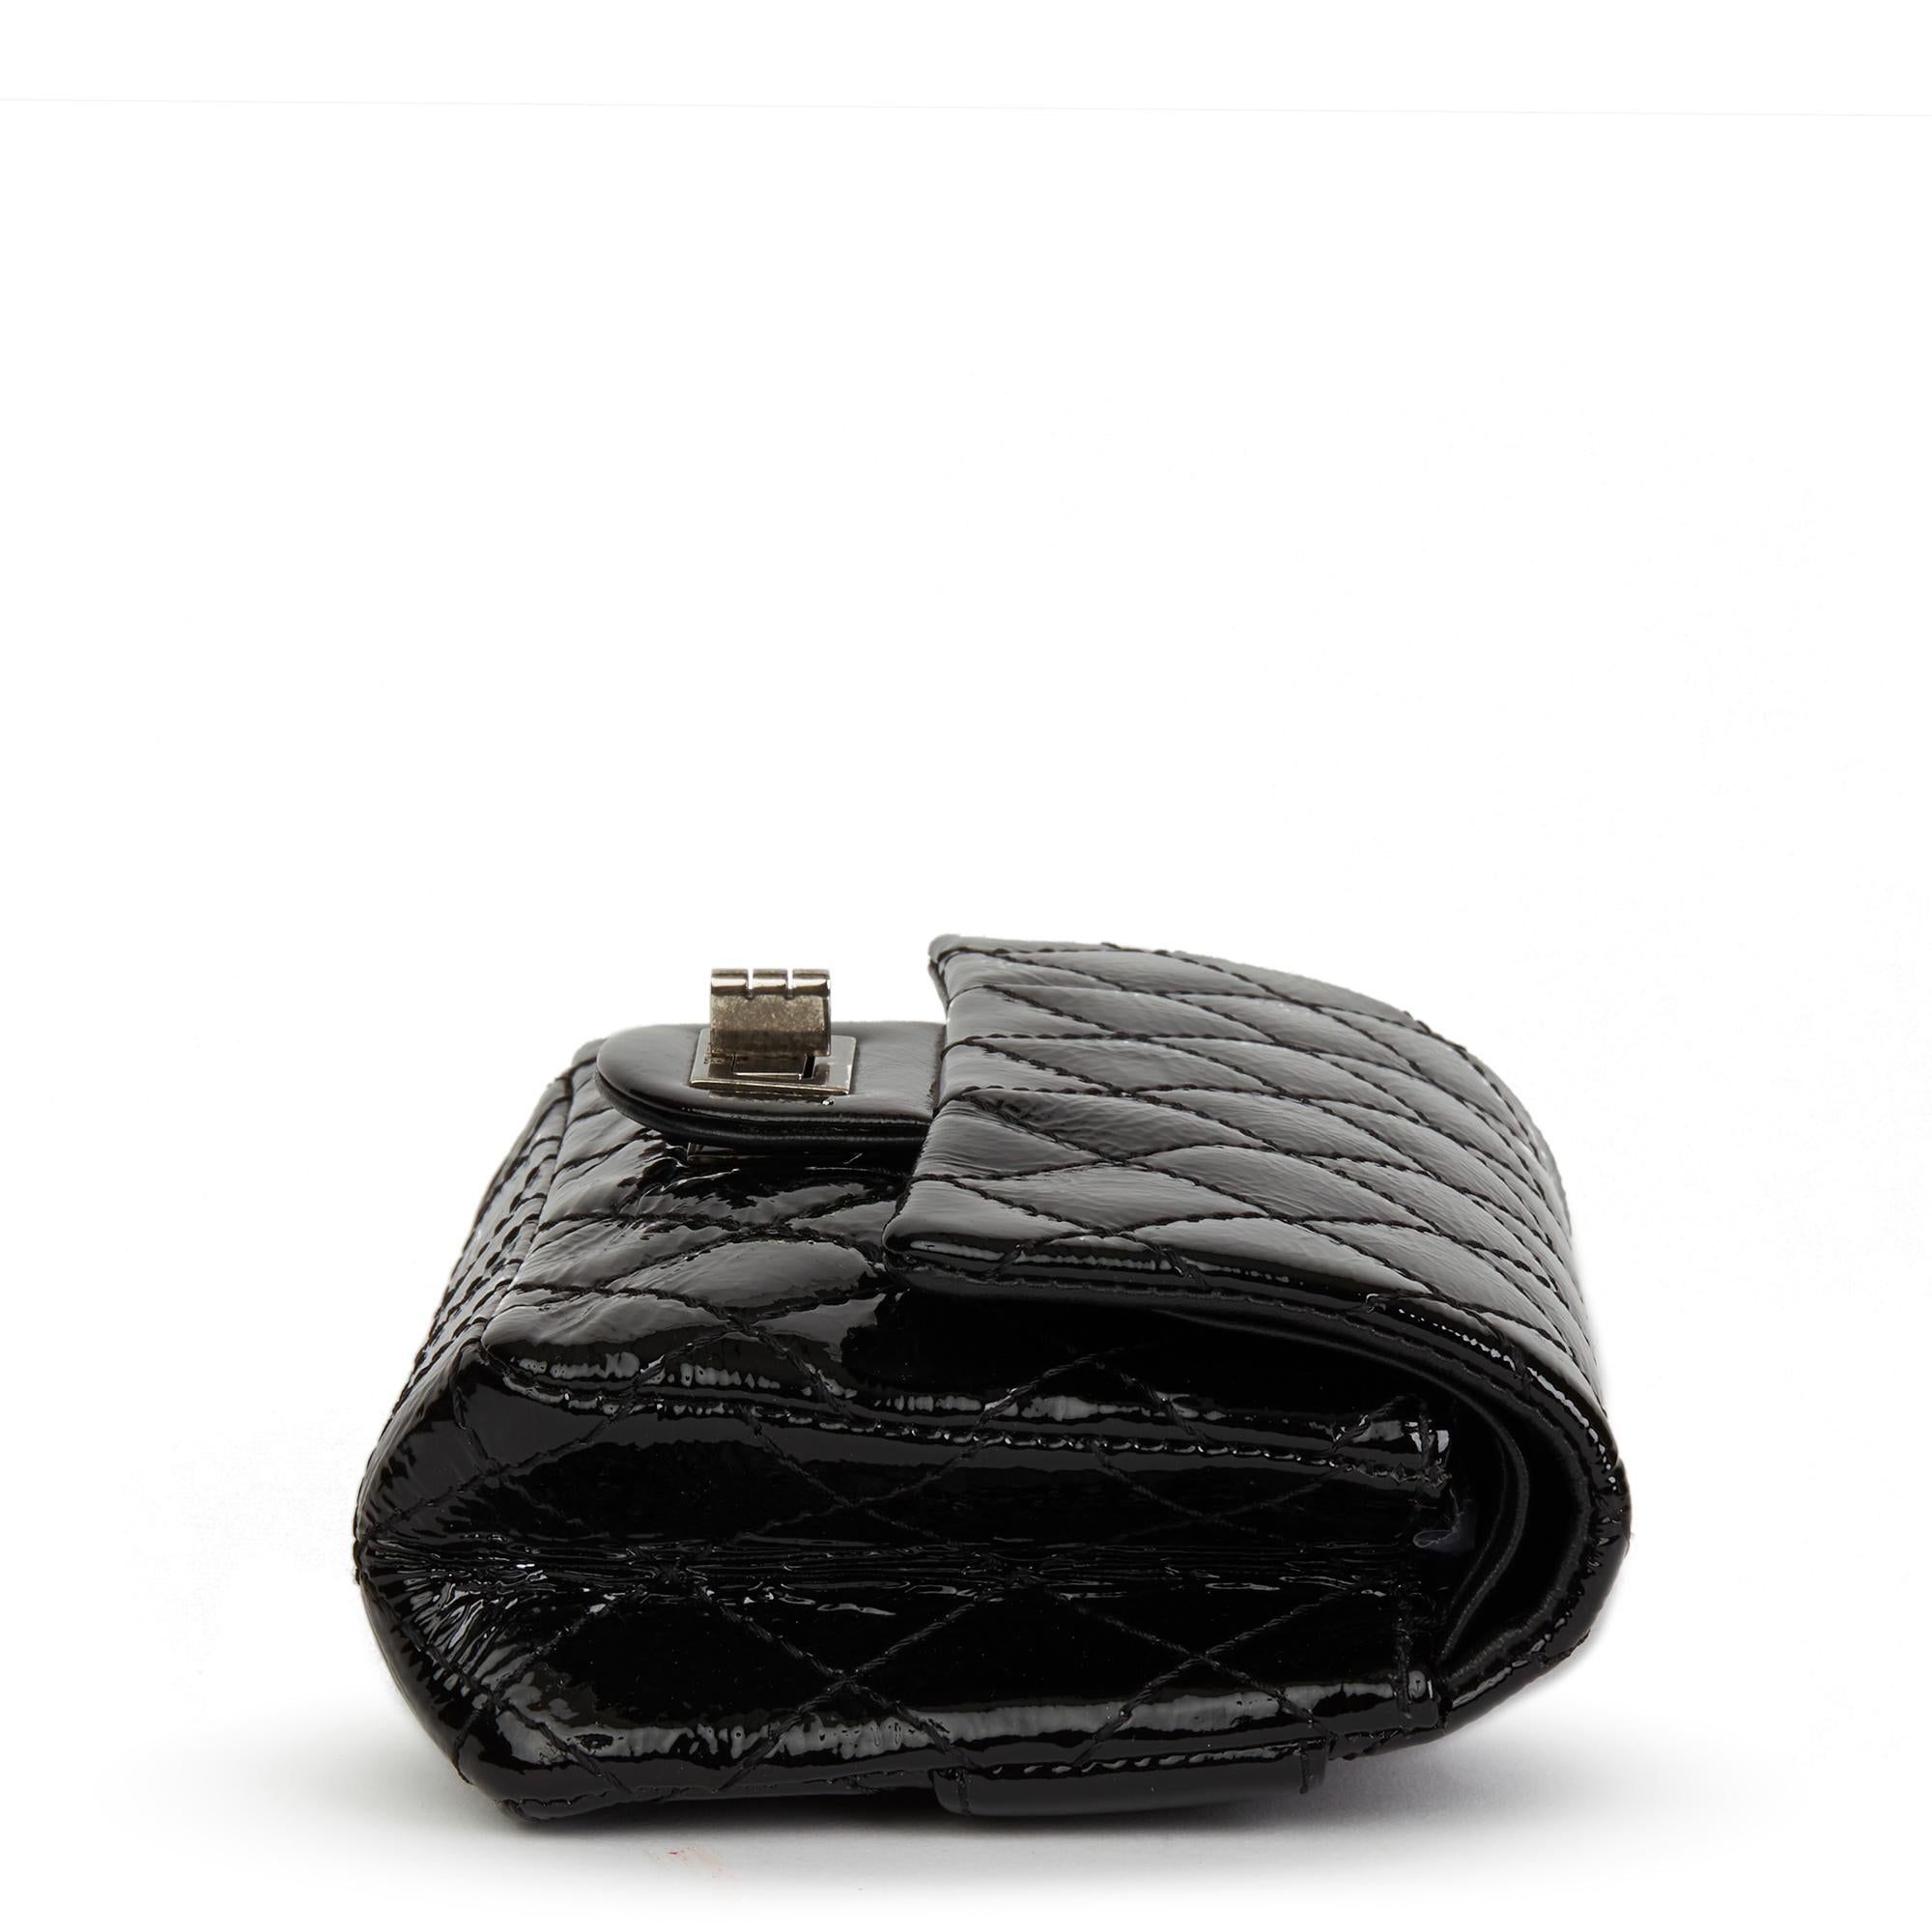 CHANEL
Black Quilted Aged Patent Leather 2.55 Reissue Clutch

Reference: HB2469
Serial Number: 11265851
Age (Circa): 2007
Accompanied By: Chanel Dust Bag, Box
Authenticity Details: Serial Sticker (Made in France)
Gender: Ladies
Type: Clutch

Colour: